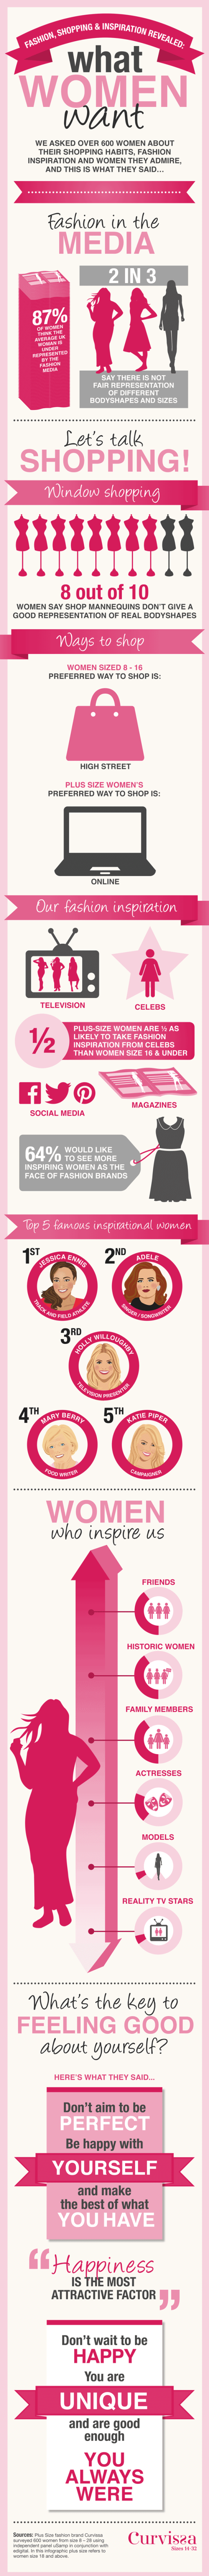 What-Women-Want-infographic-1